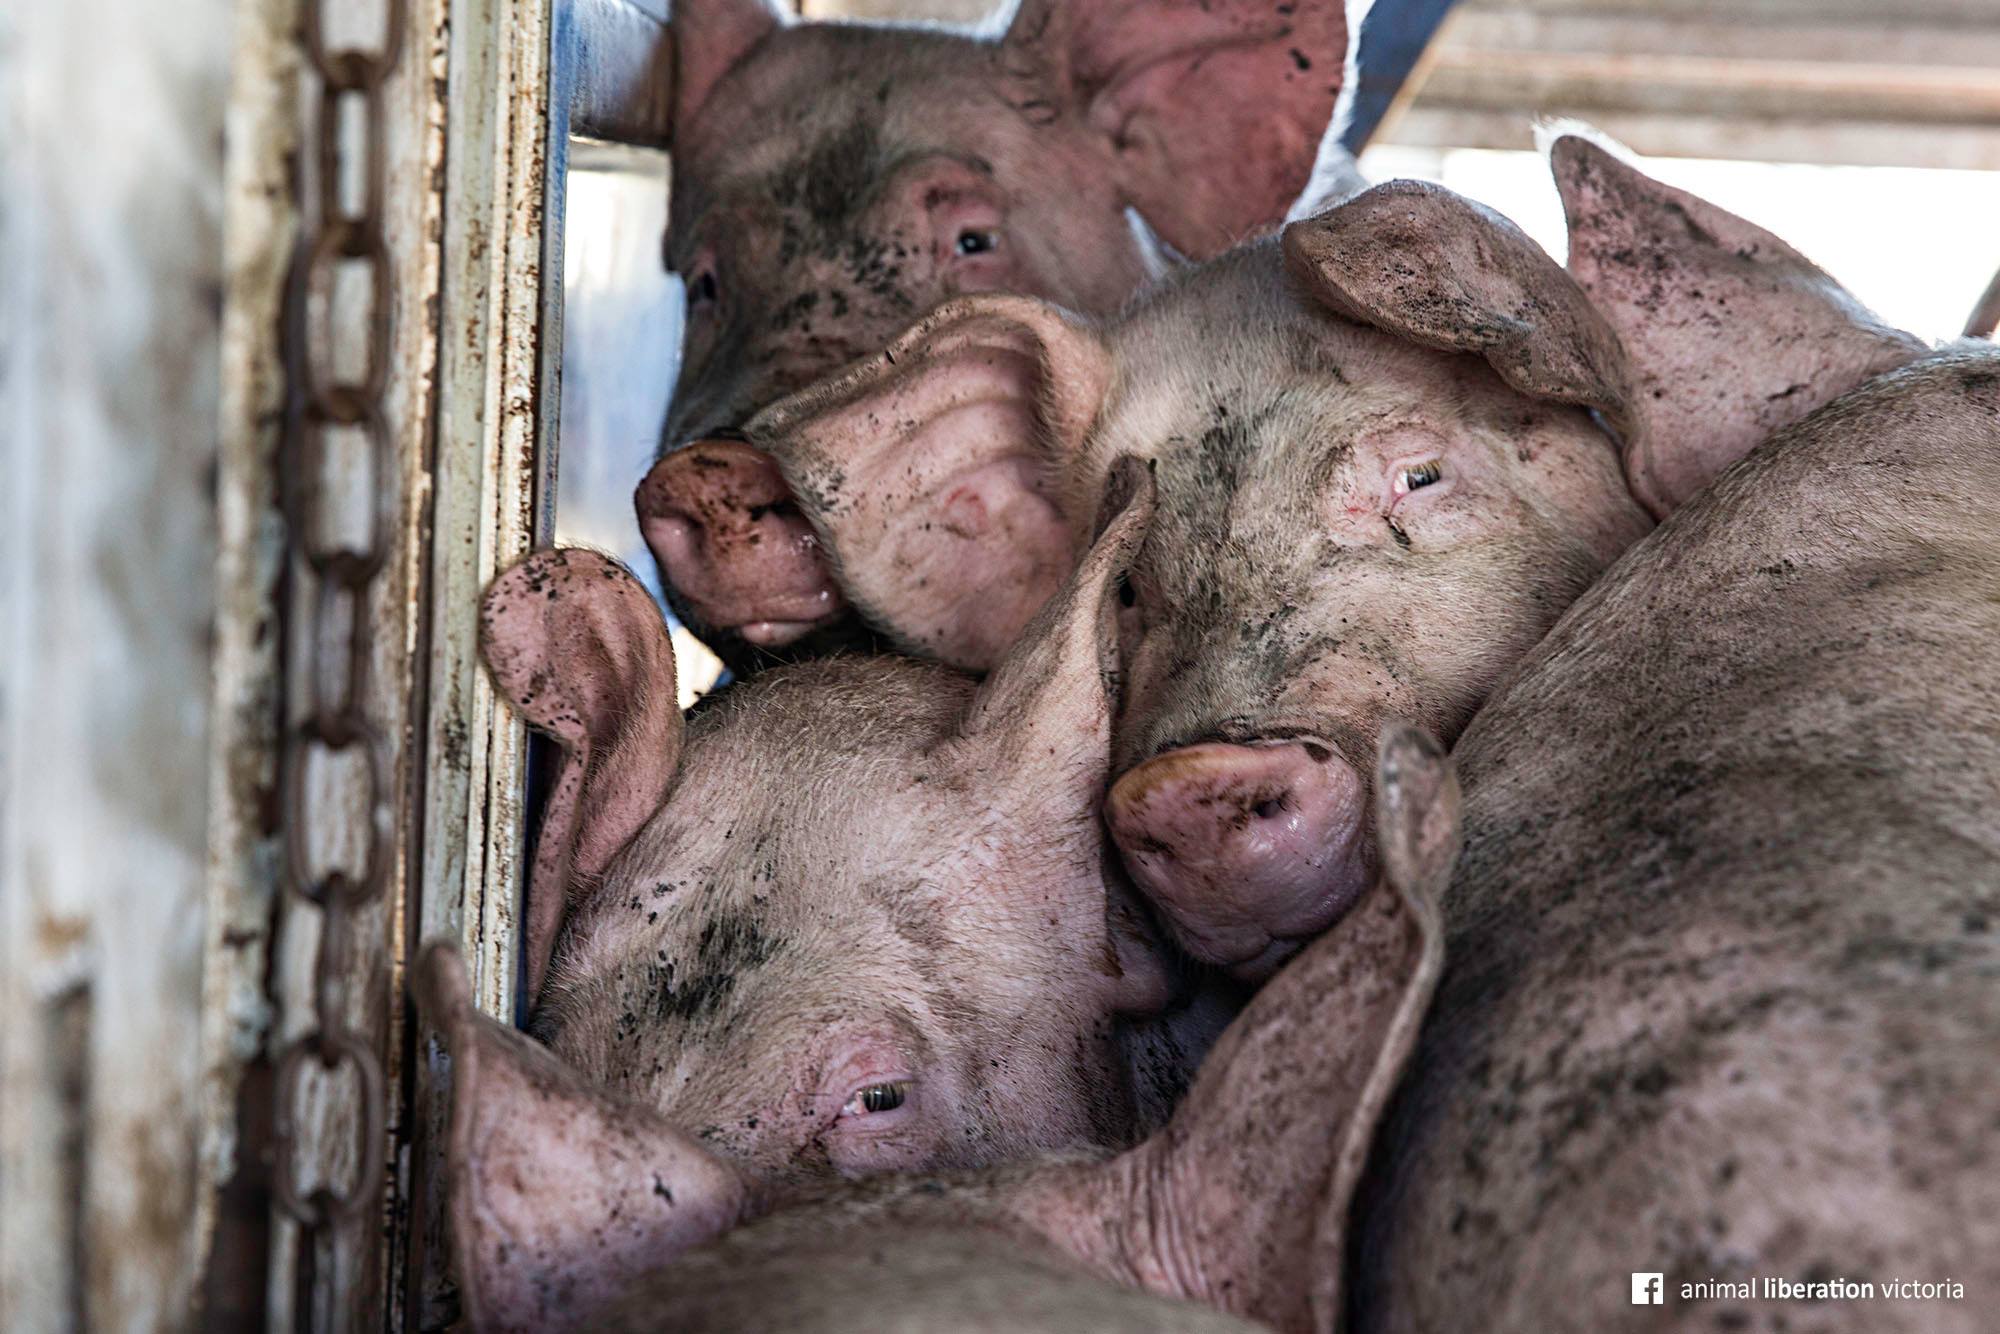 Five pigs in the back of a truck, cramped, dirty and looking at the camera